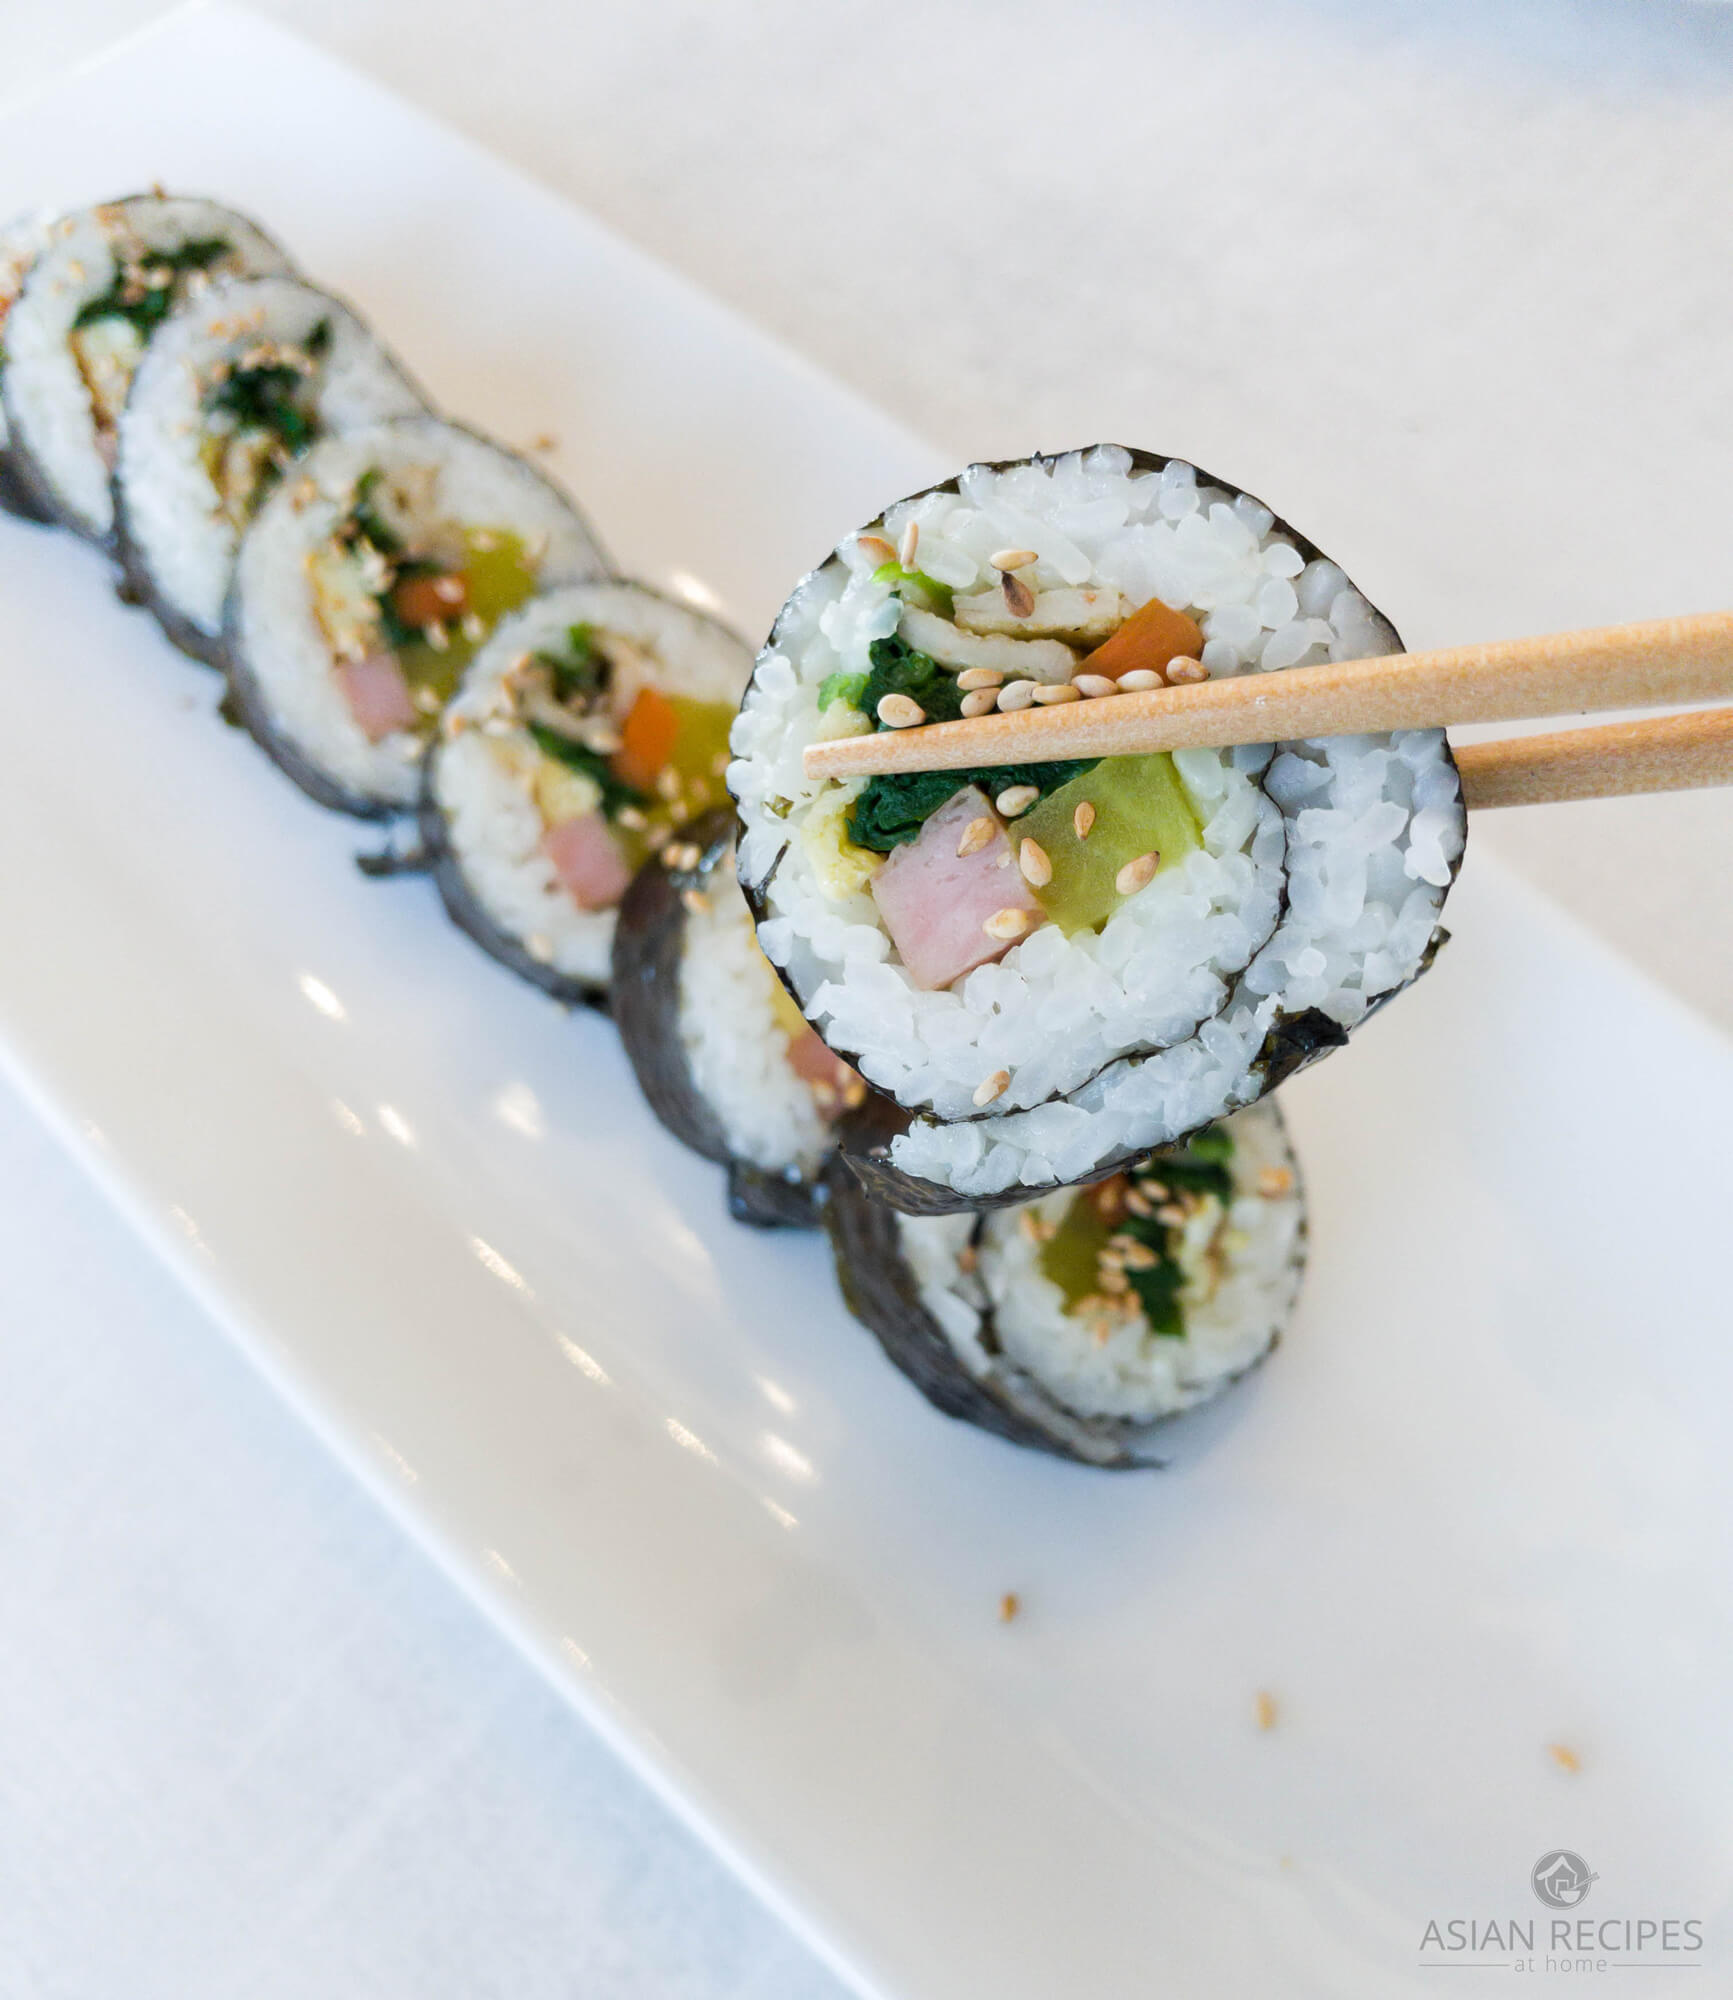 Make basic Korean kimbap, also known as Korean sushi rolls, with our easy and delicious recipe!